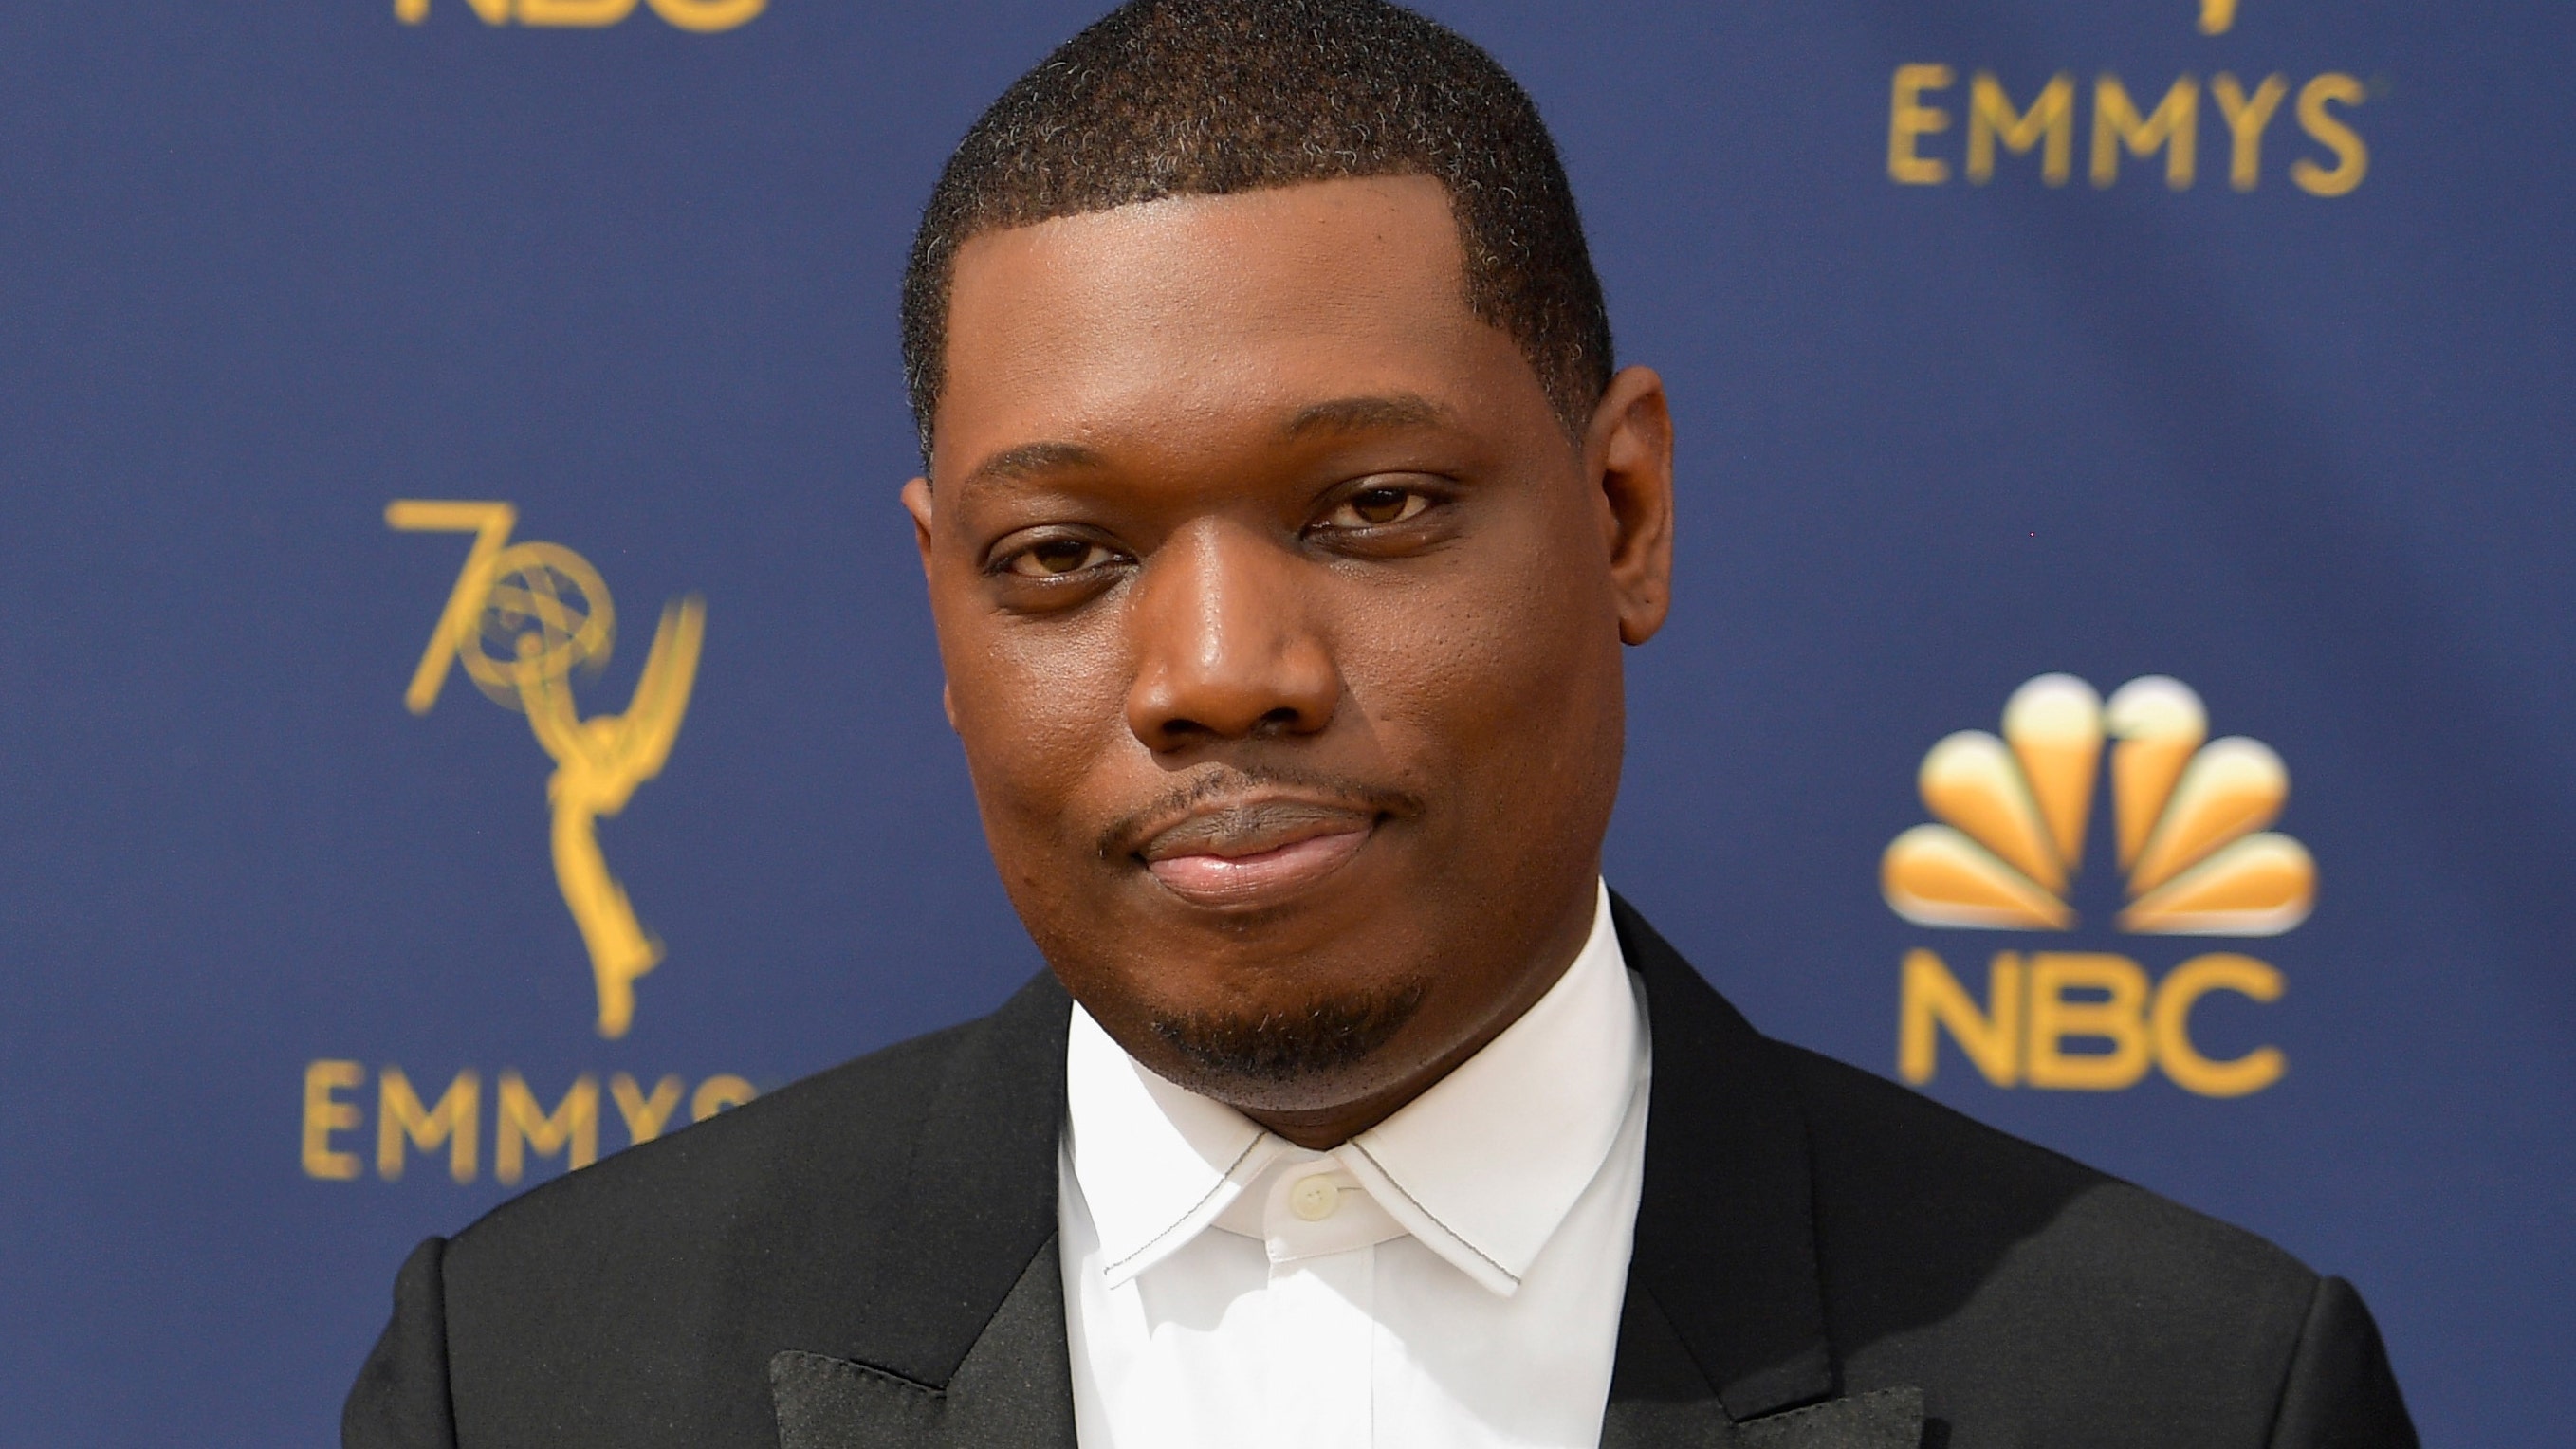 ‘SNL’ Michael Che, NBC accused of ‘anti-Semitic tropes’ in ‘Weekend Update’ segment: ‘Retreat and apologize’